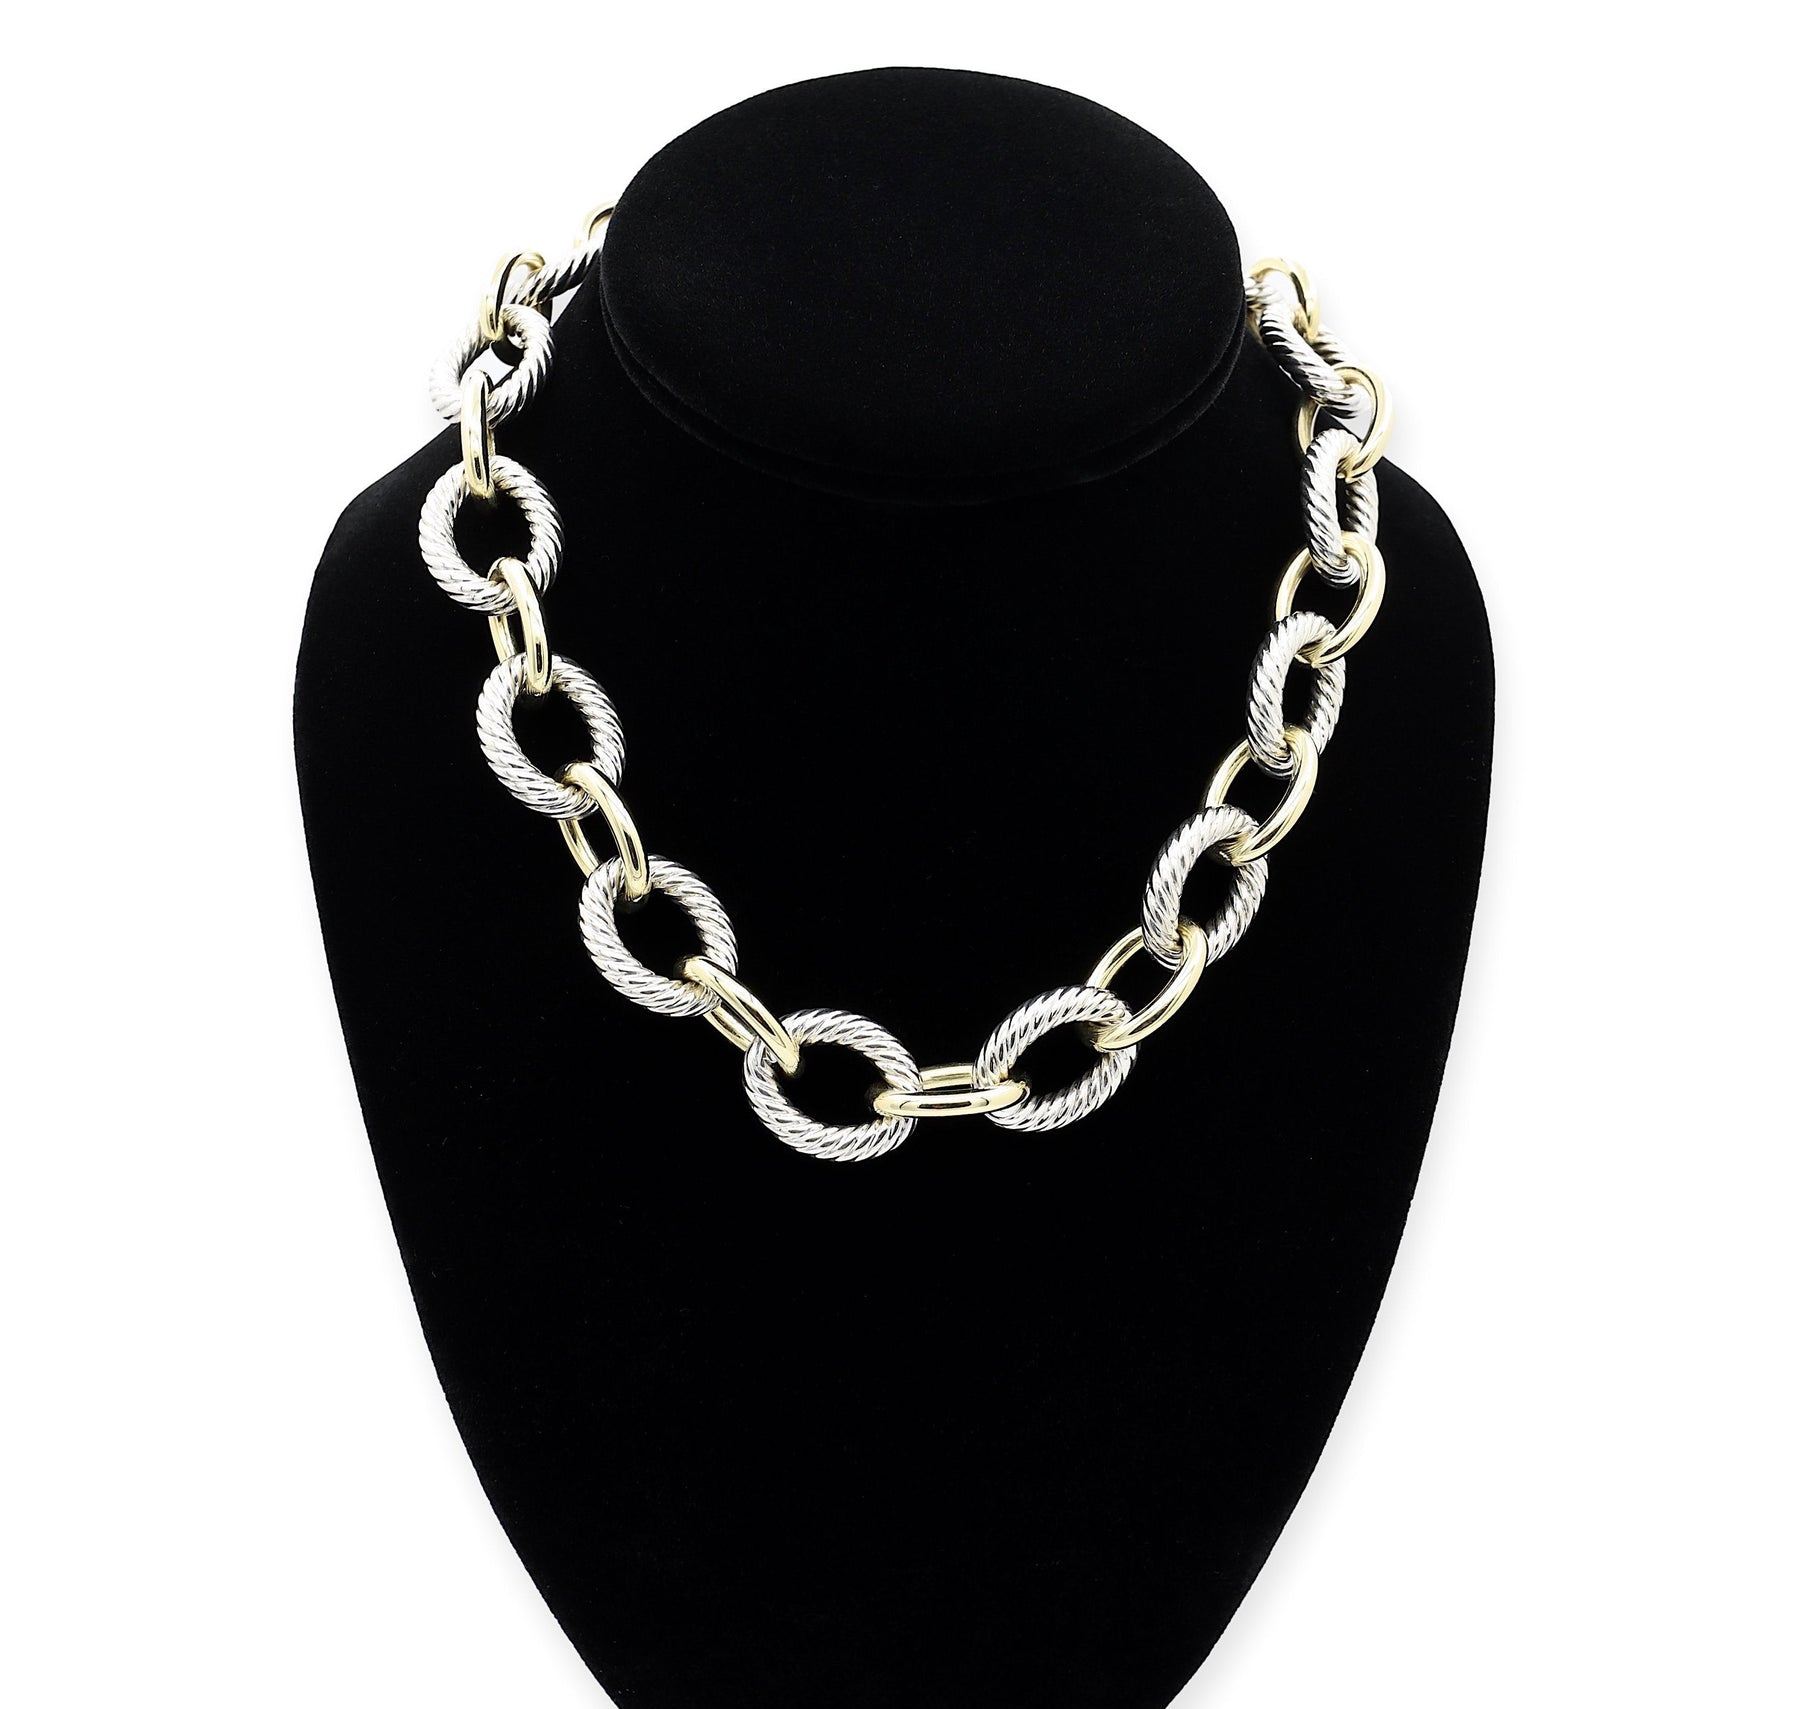 David Yurman Ceramic Oval Link Necklace - Sterling Silver Chain, Necklaces  - DVY135603 | The RealReal